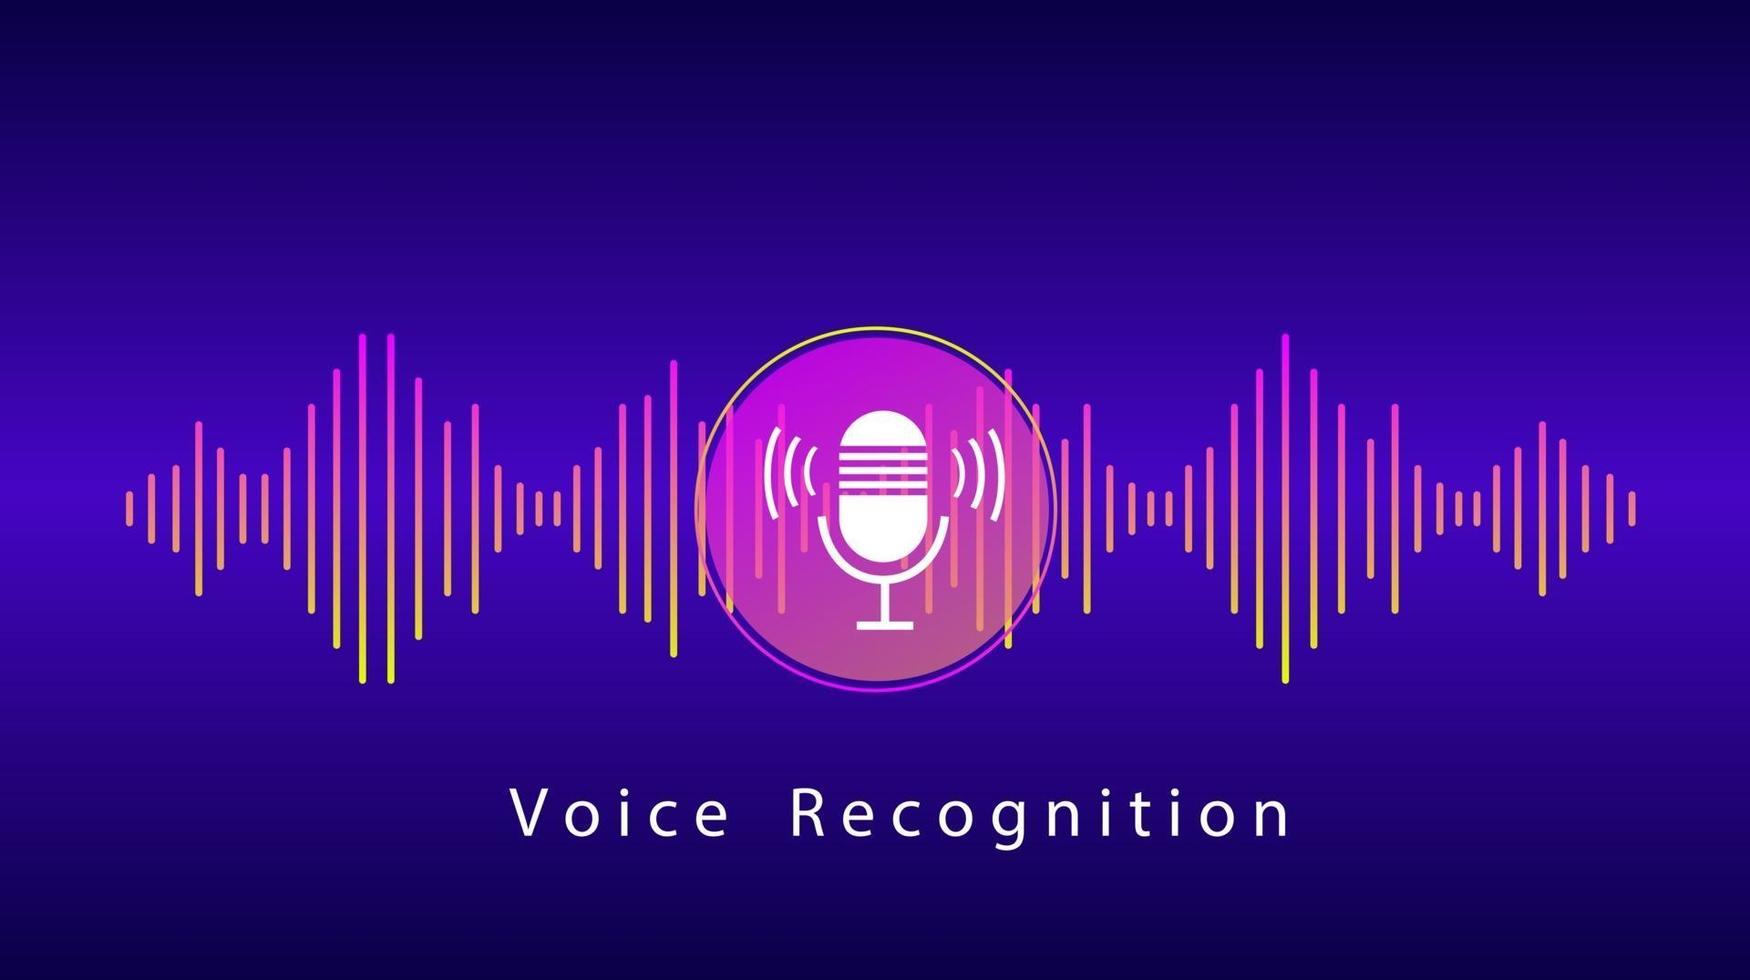 Voice Recognition and Personal Assistant Concept. Illustration of Gradient Vector sound wave and Microphone with bright voice button control. Voice imitation and intelligent technologies.